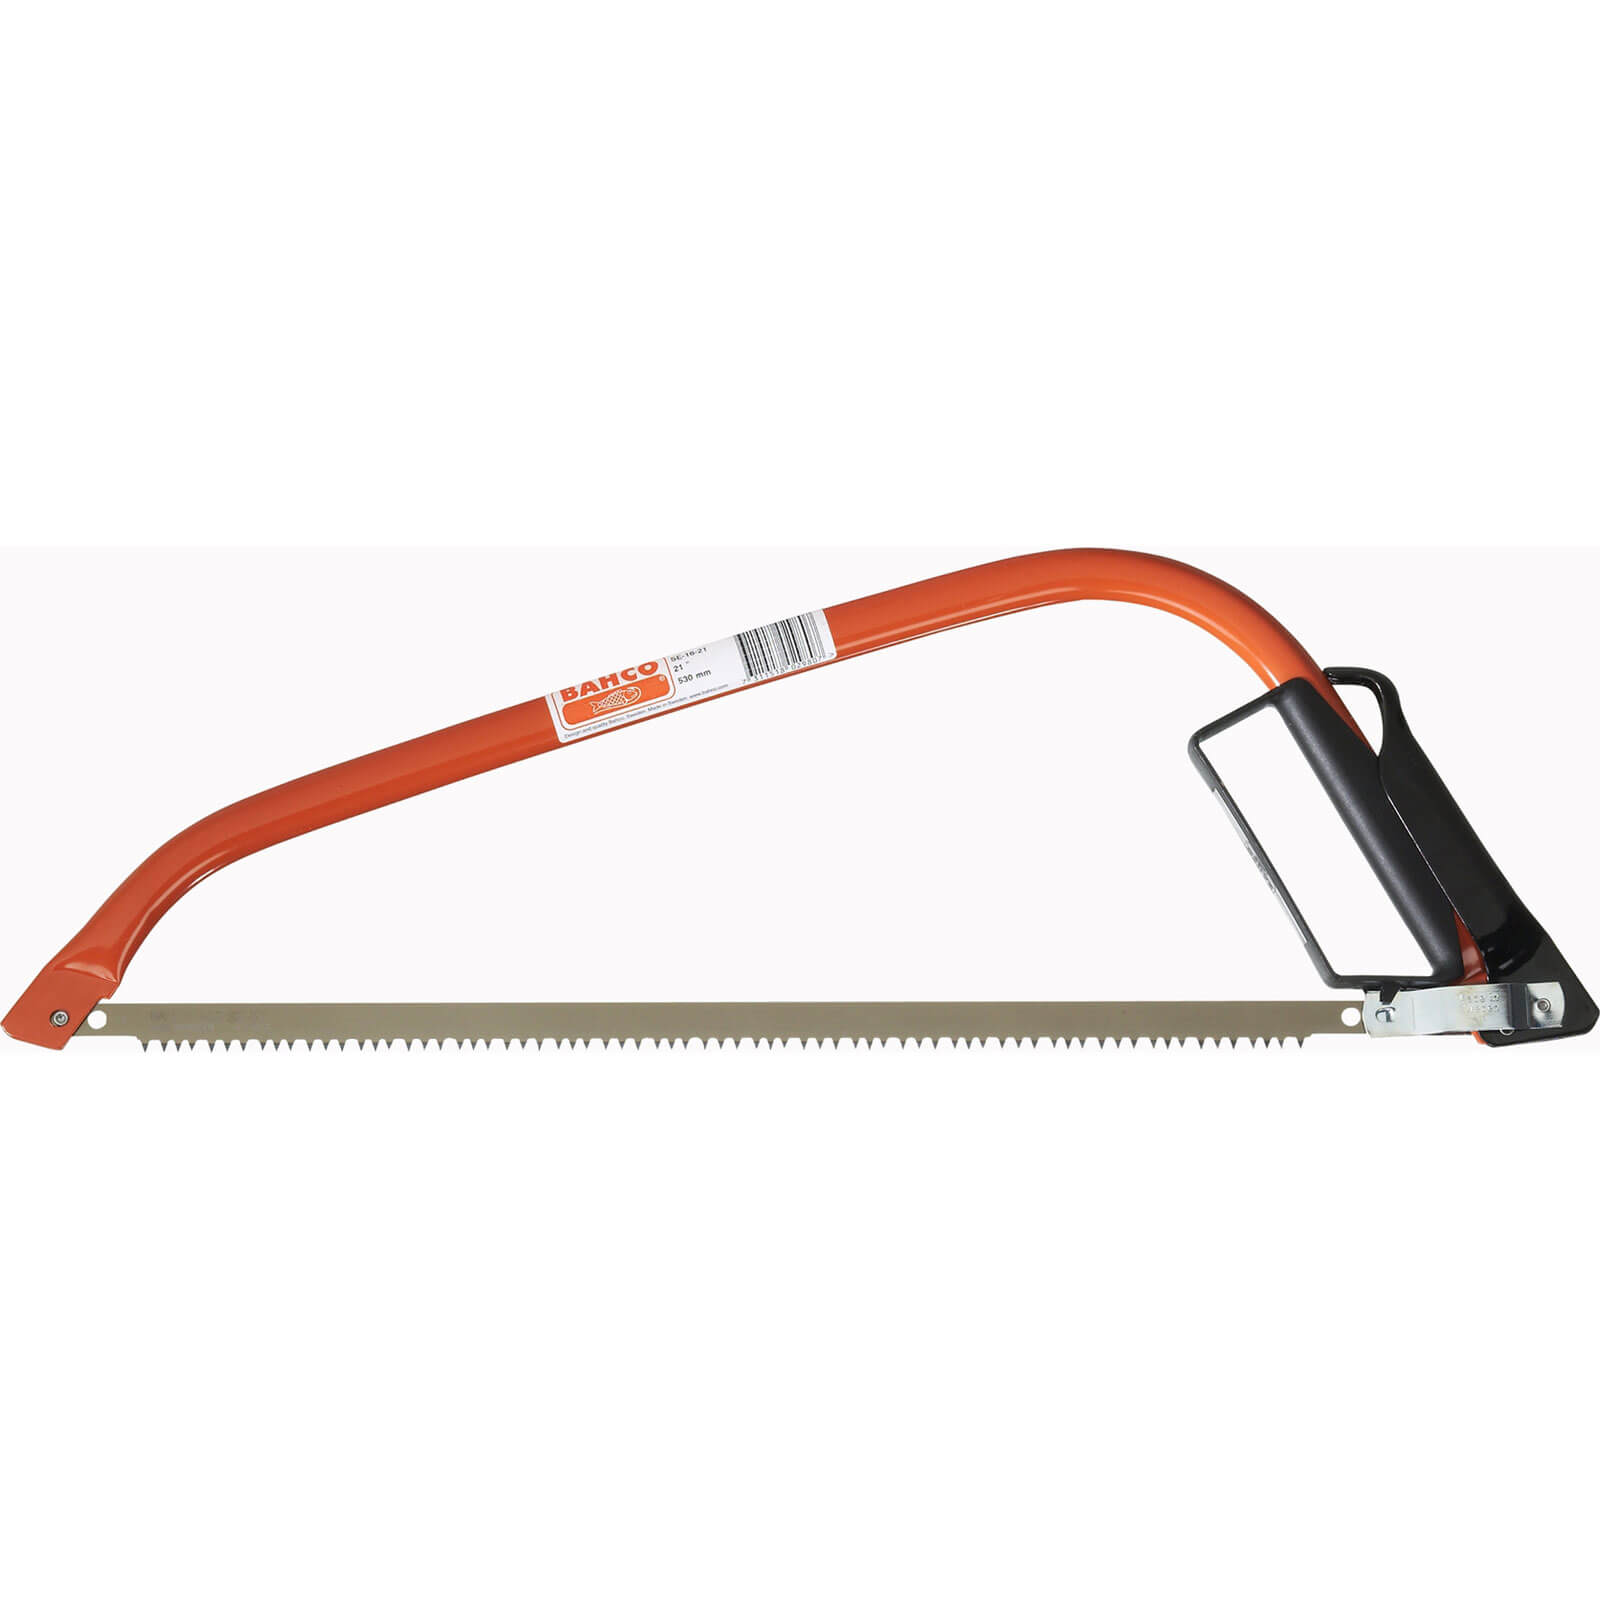 Image of Bahco Professional Pointed Nose Bow Saw 21" / 525mm